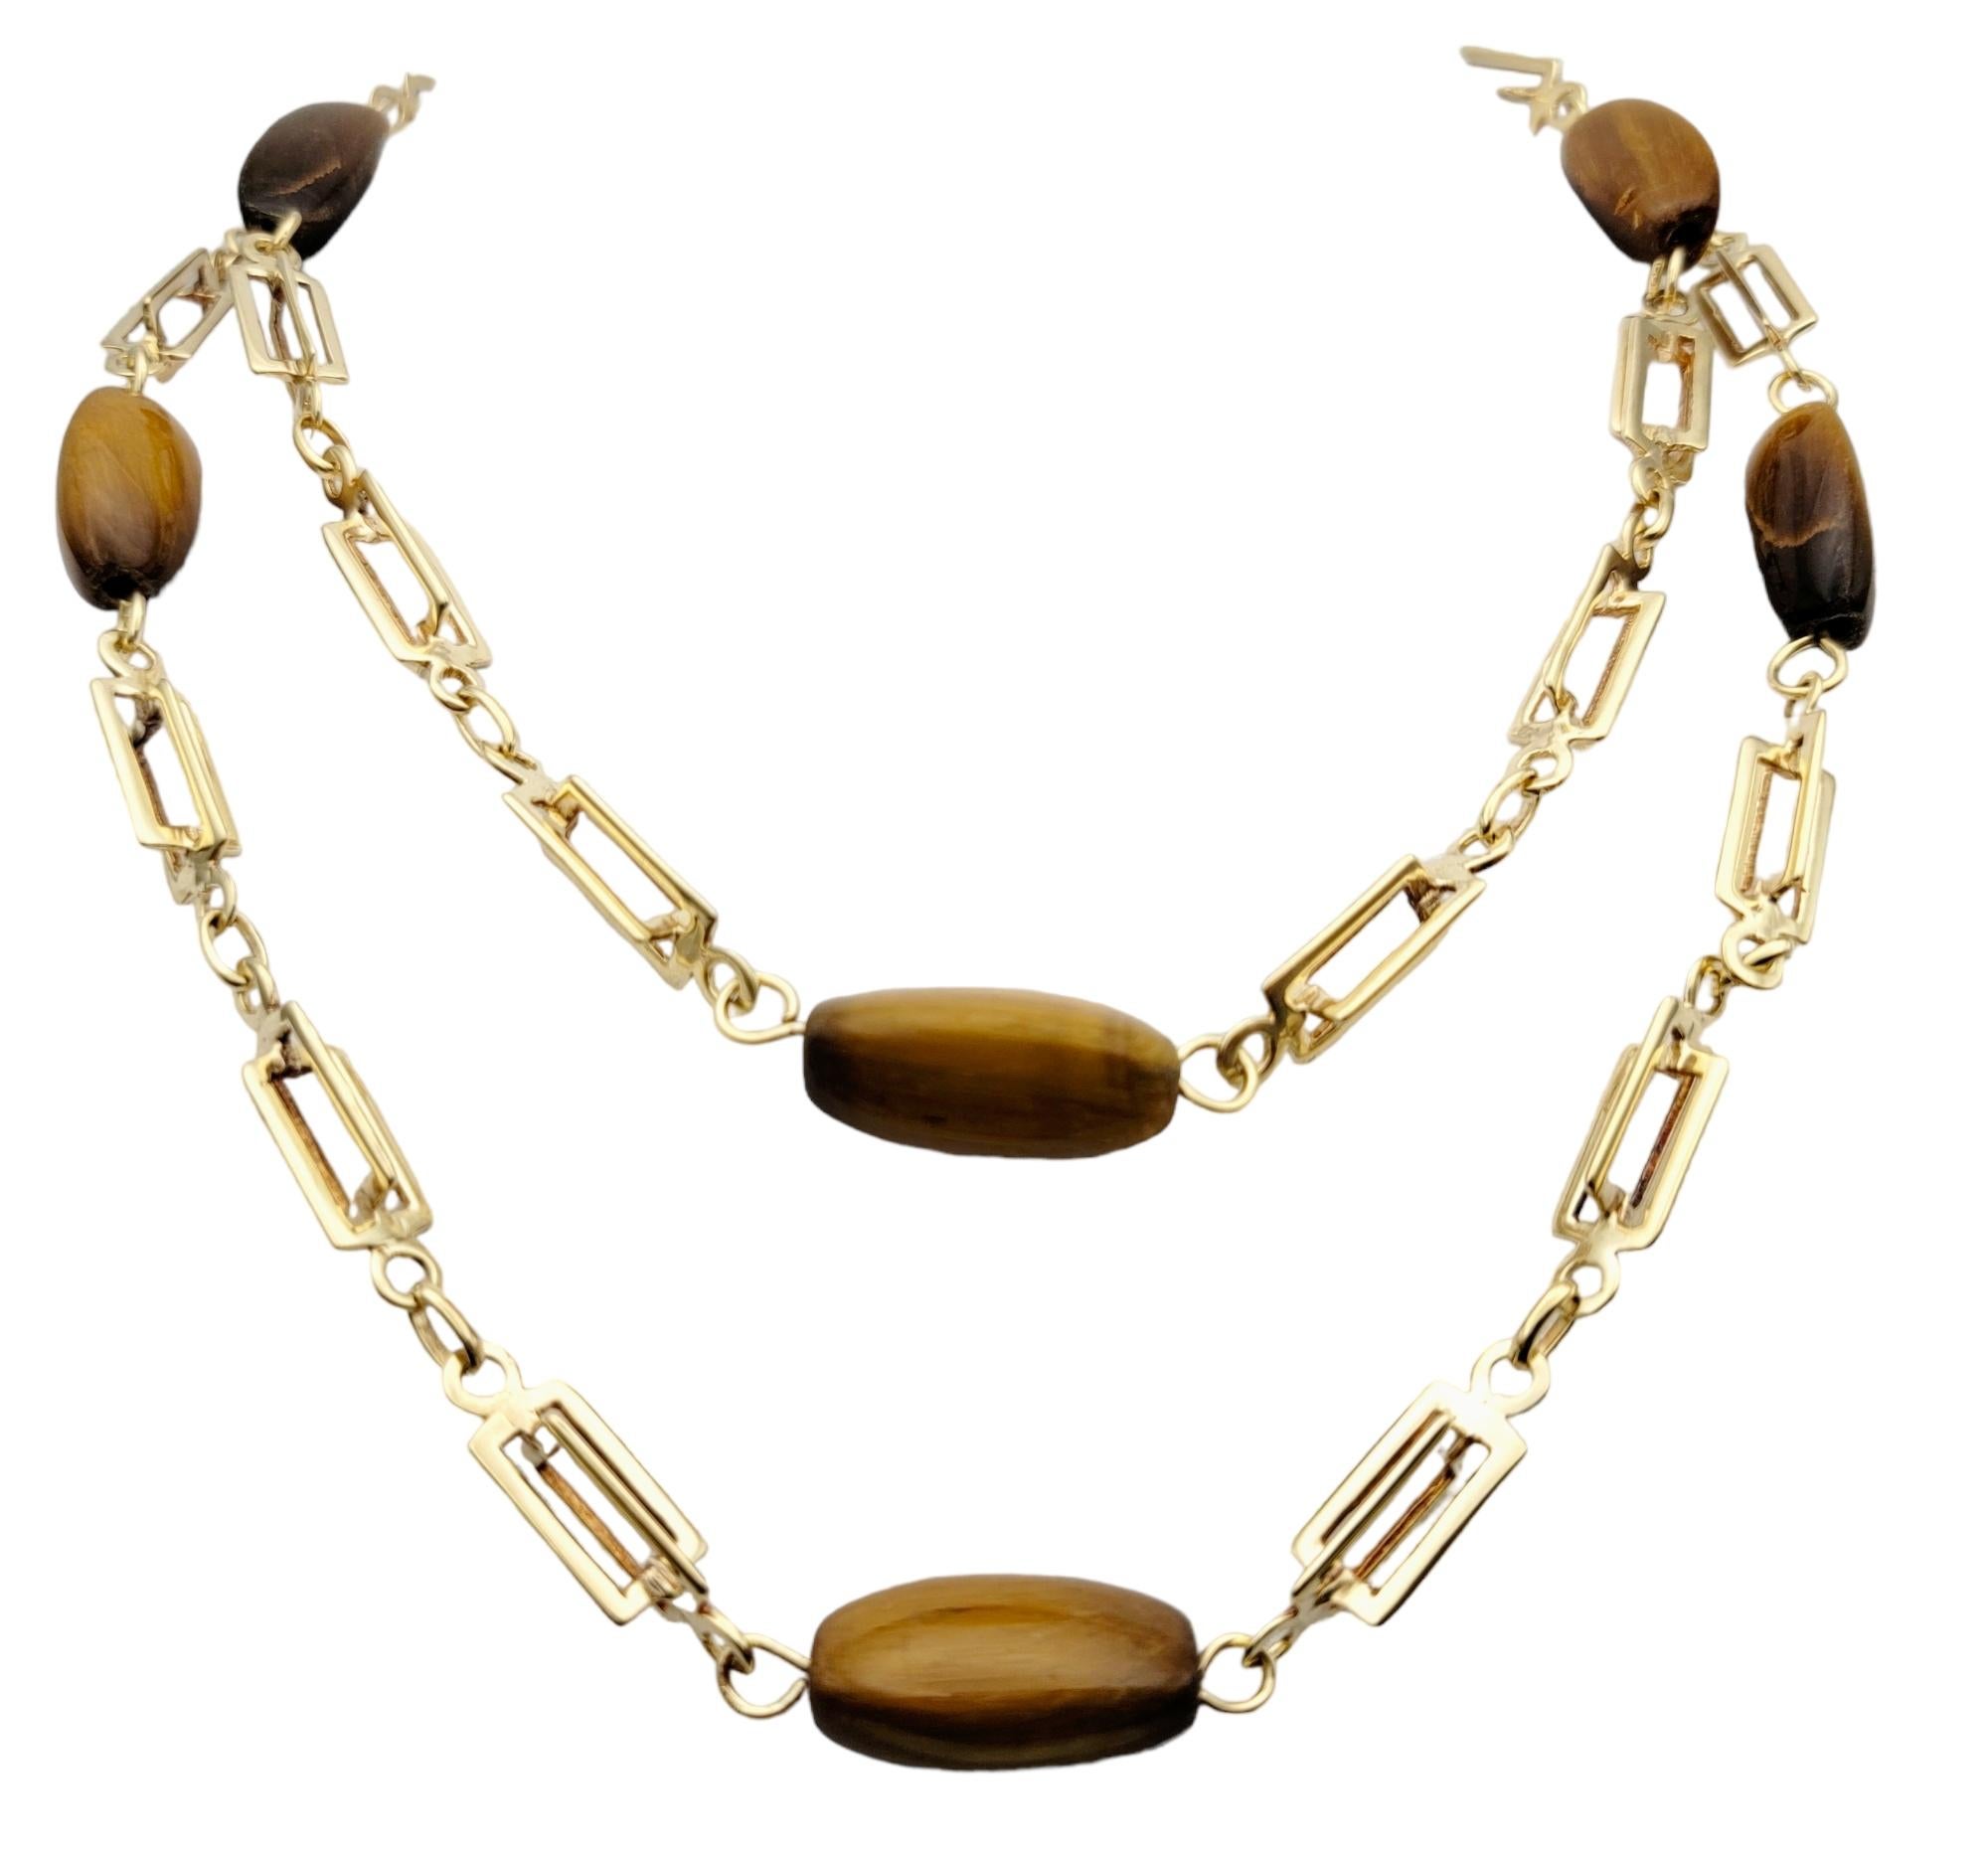 Contemporary elongated gold station necklace with lustrous Tiger's eye stones throughout. Long and luxurious, this modern necklace is a unique and fashionable piece you will wear again and again. 
 
This eye-catching necklace features a polished 14